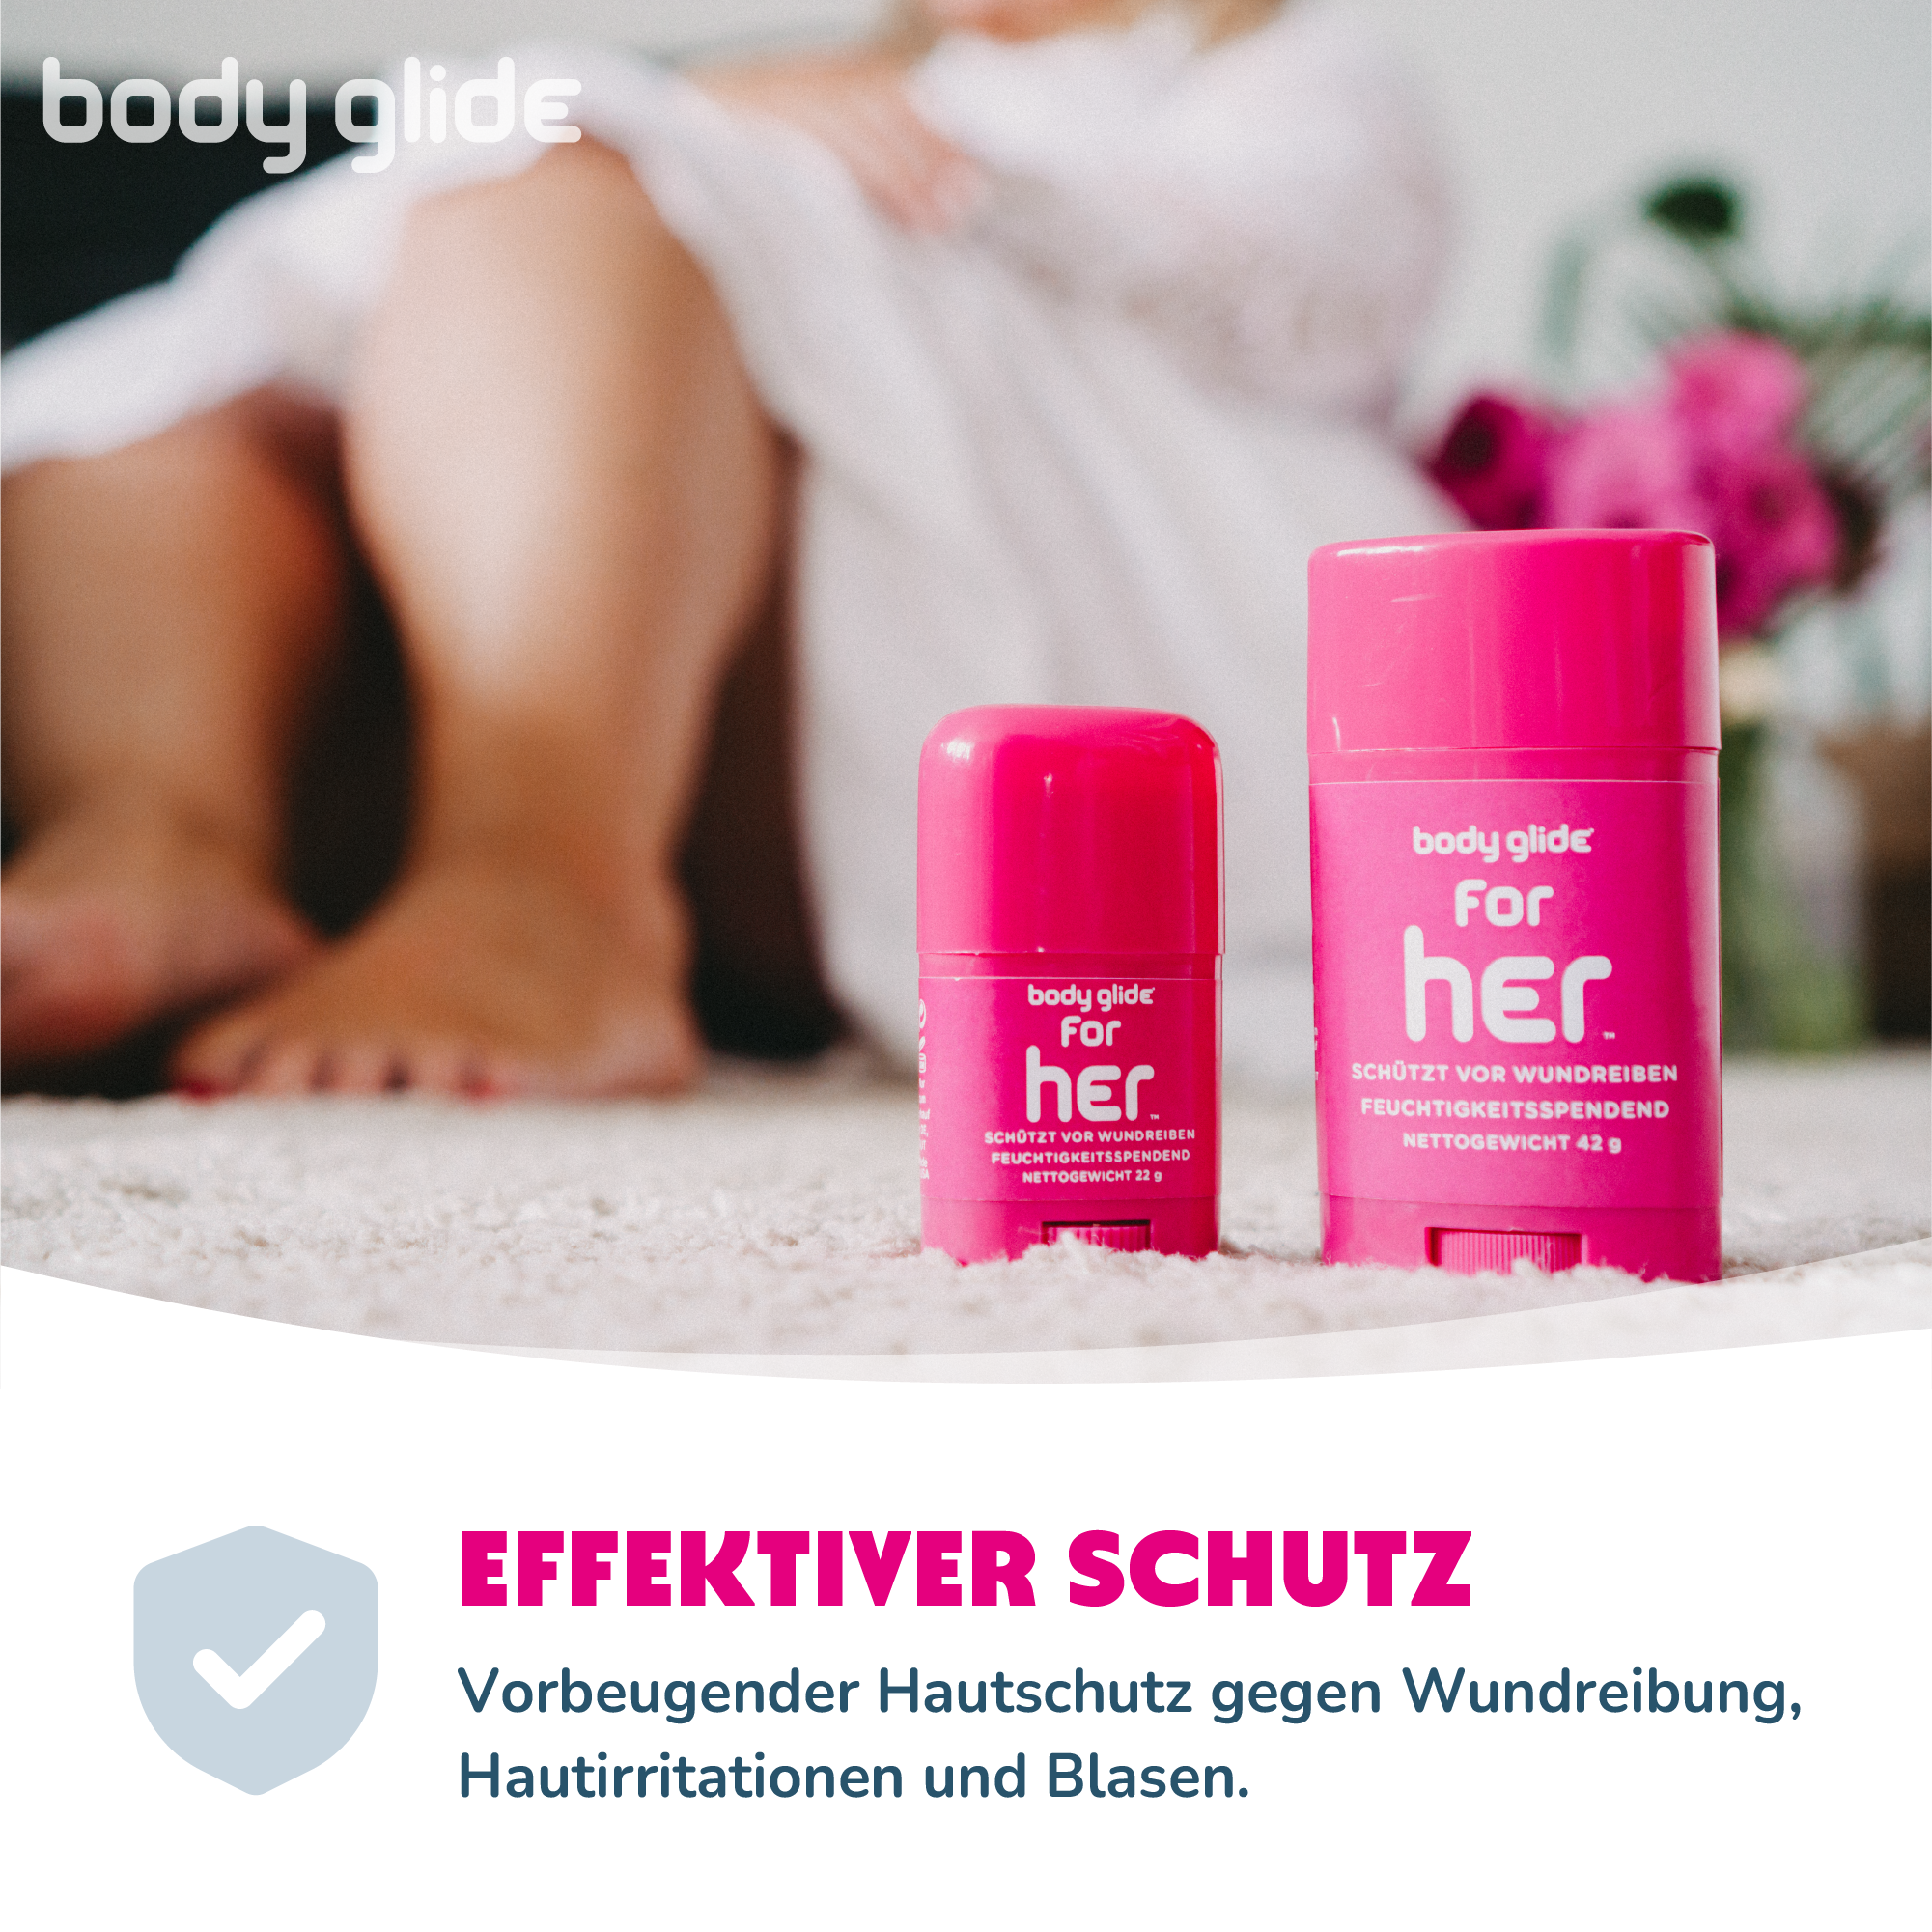 BODY GLIDE „for her“